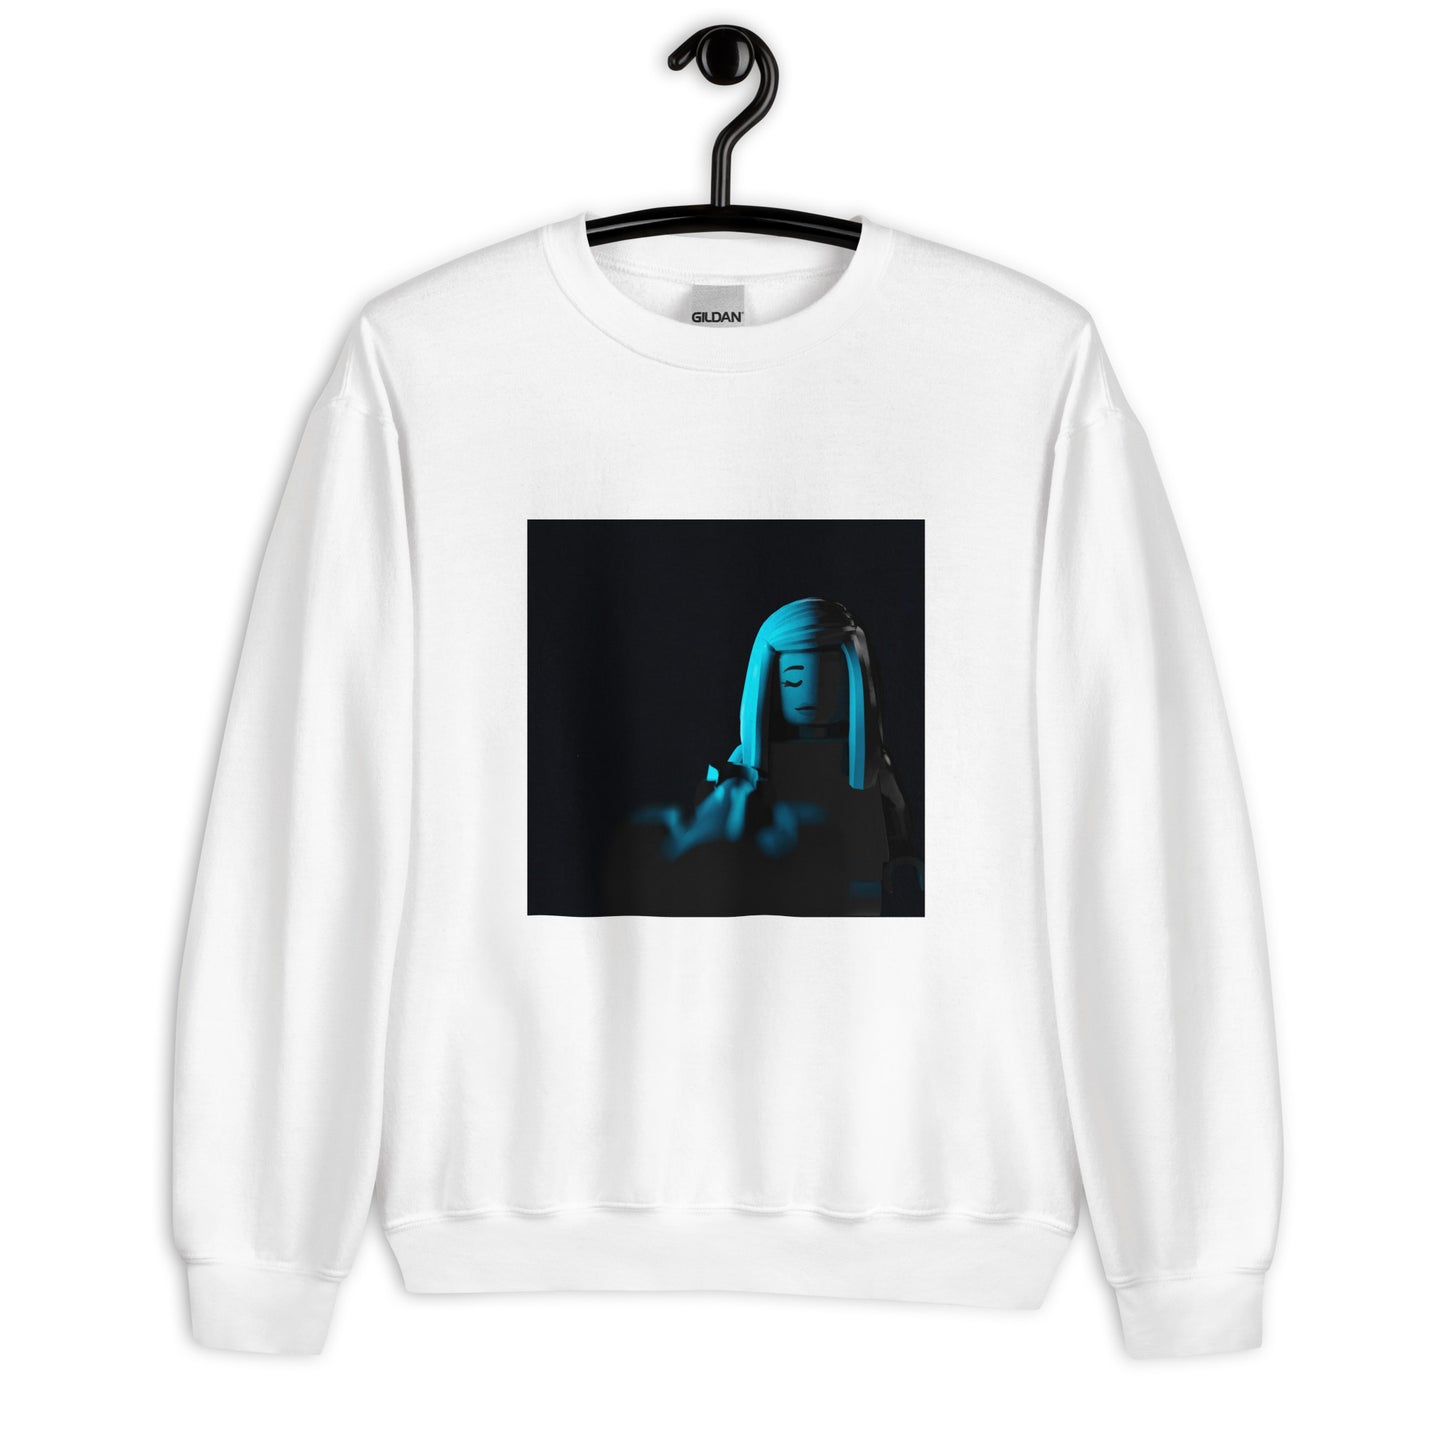 "TV Girl - The Night in Question: French Exit Outtakes" Lego Parody Sweatshirt